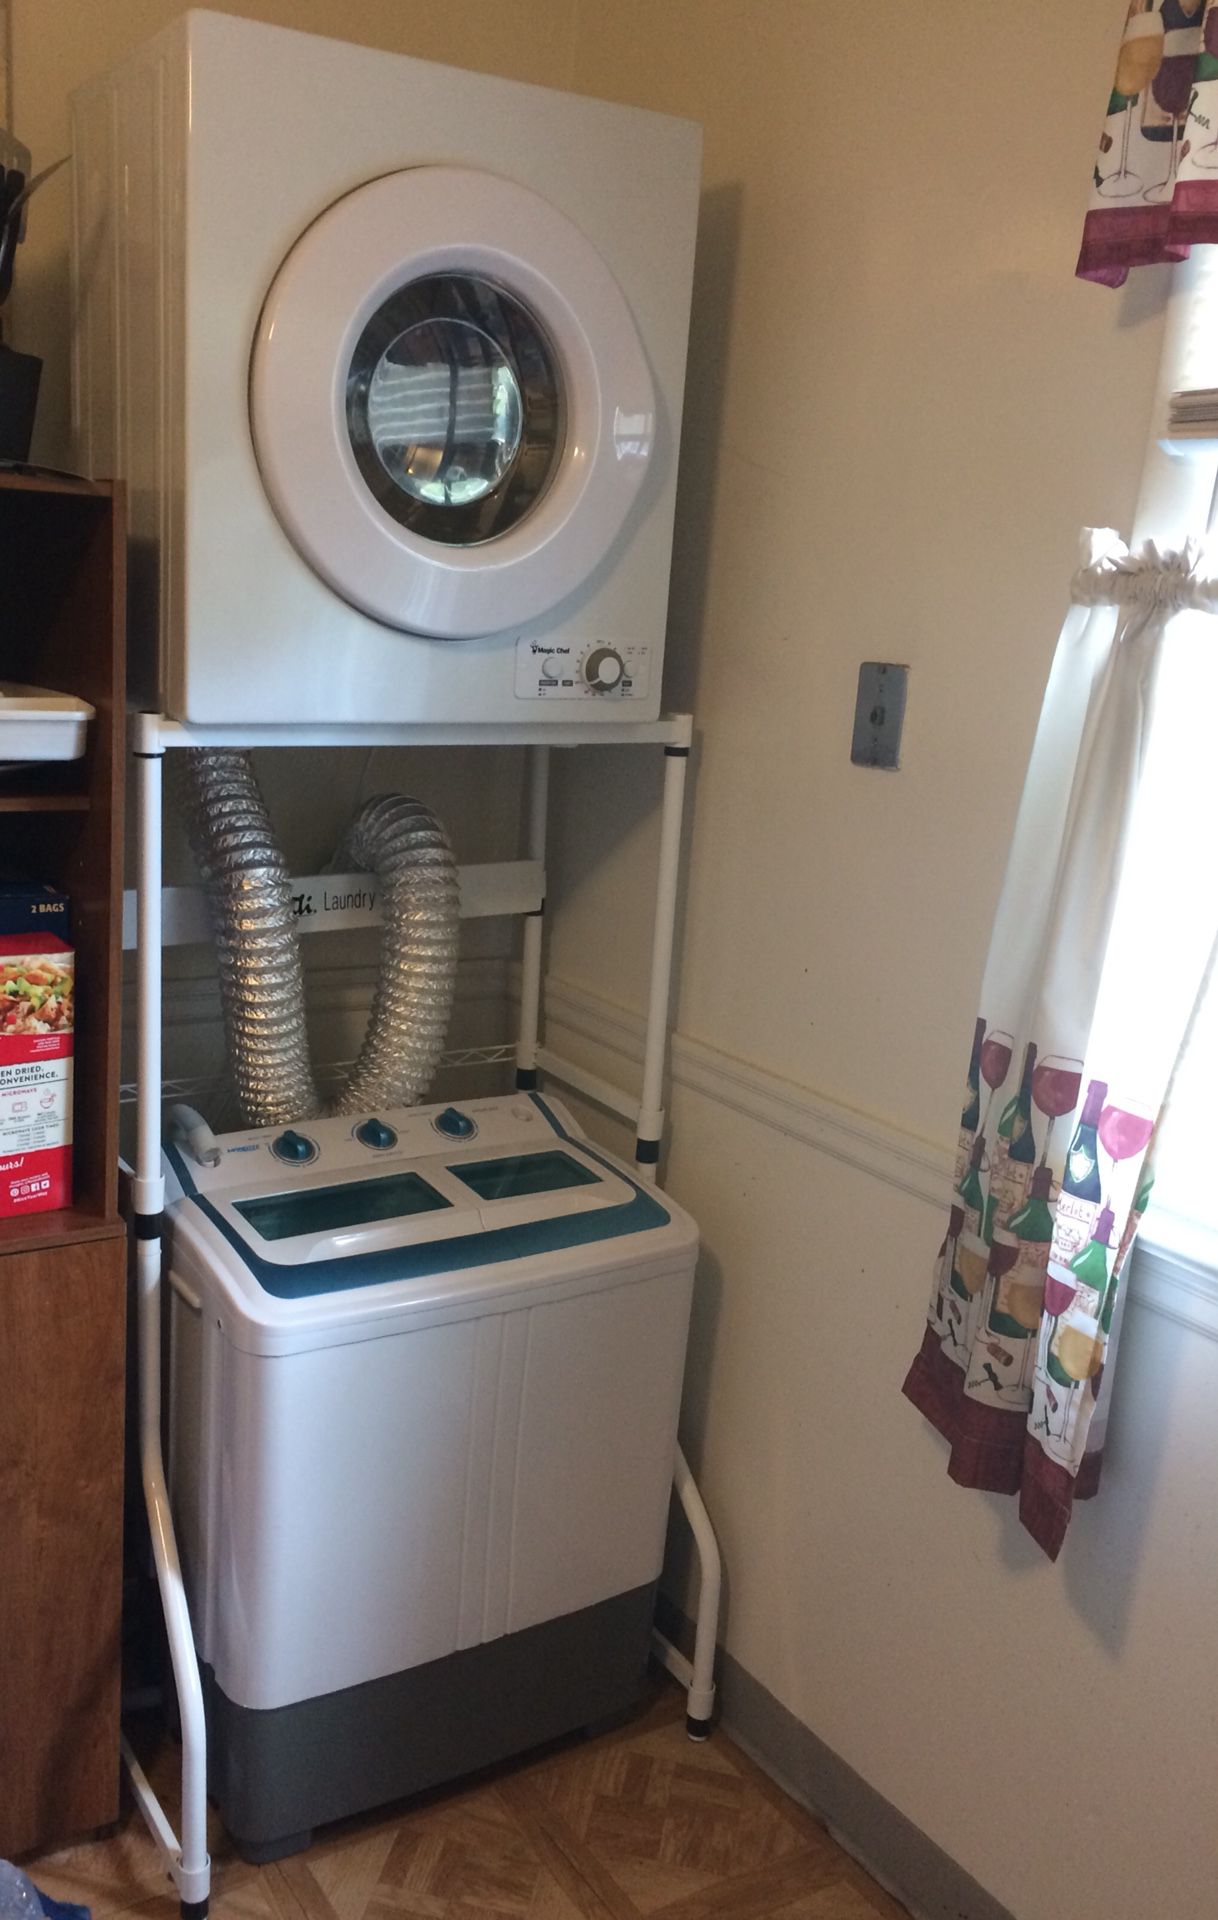 Zeny Portable Washer| Washing Machine For Apartments for Sale in North  Arlington, NJ - OfferUp